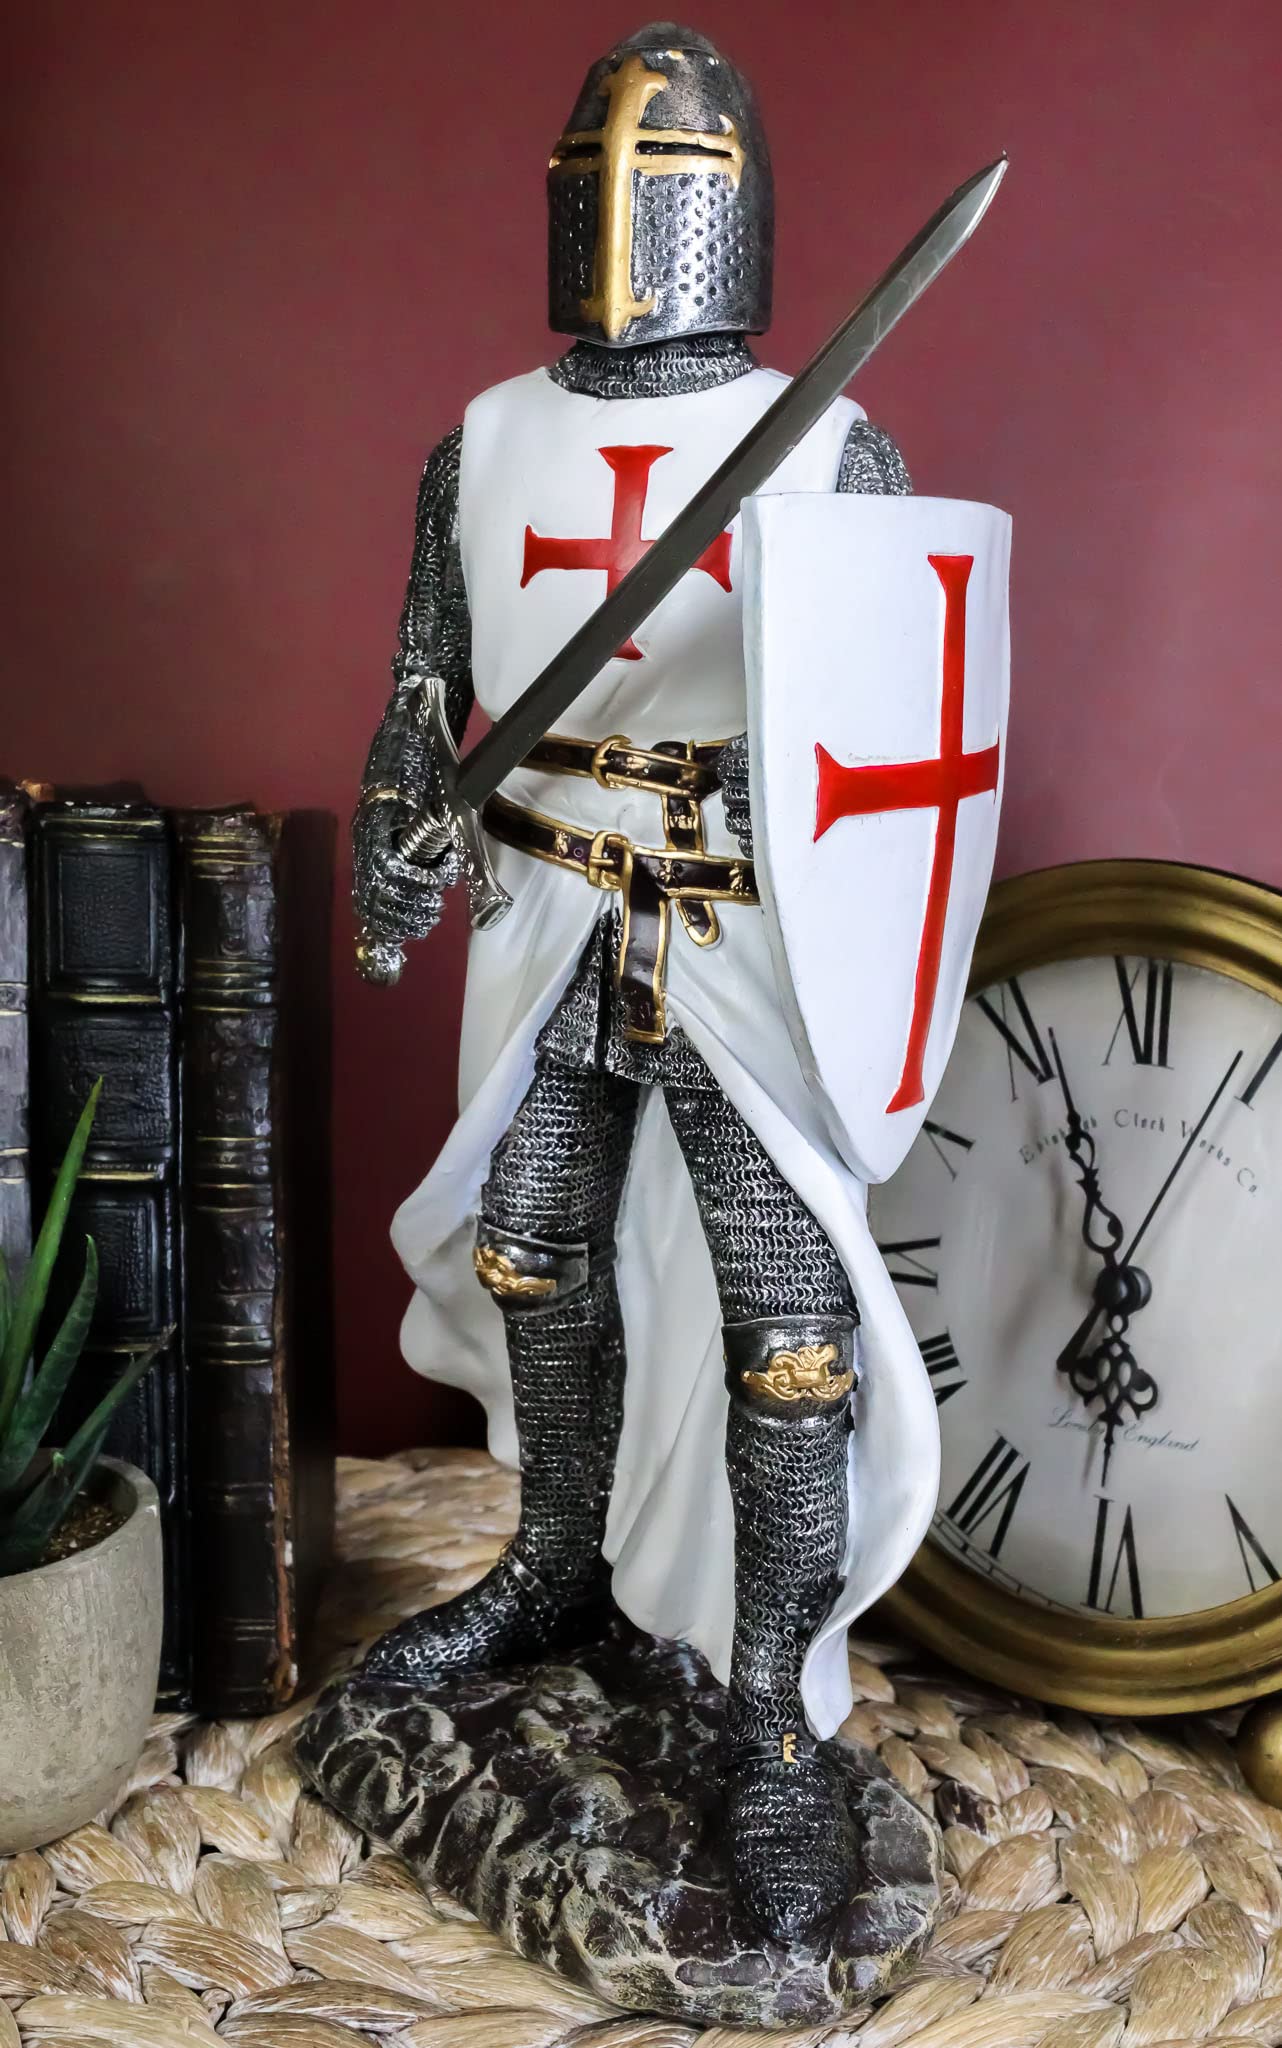 Ebros White Cloak Caped Medieval Crusader Swordsman Knight Figurine 11.5" H Medieval Royal Suit of Armor Knight of The Cross Resin Collectible